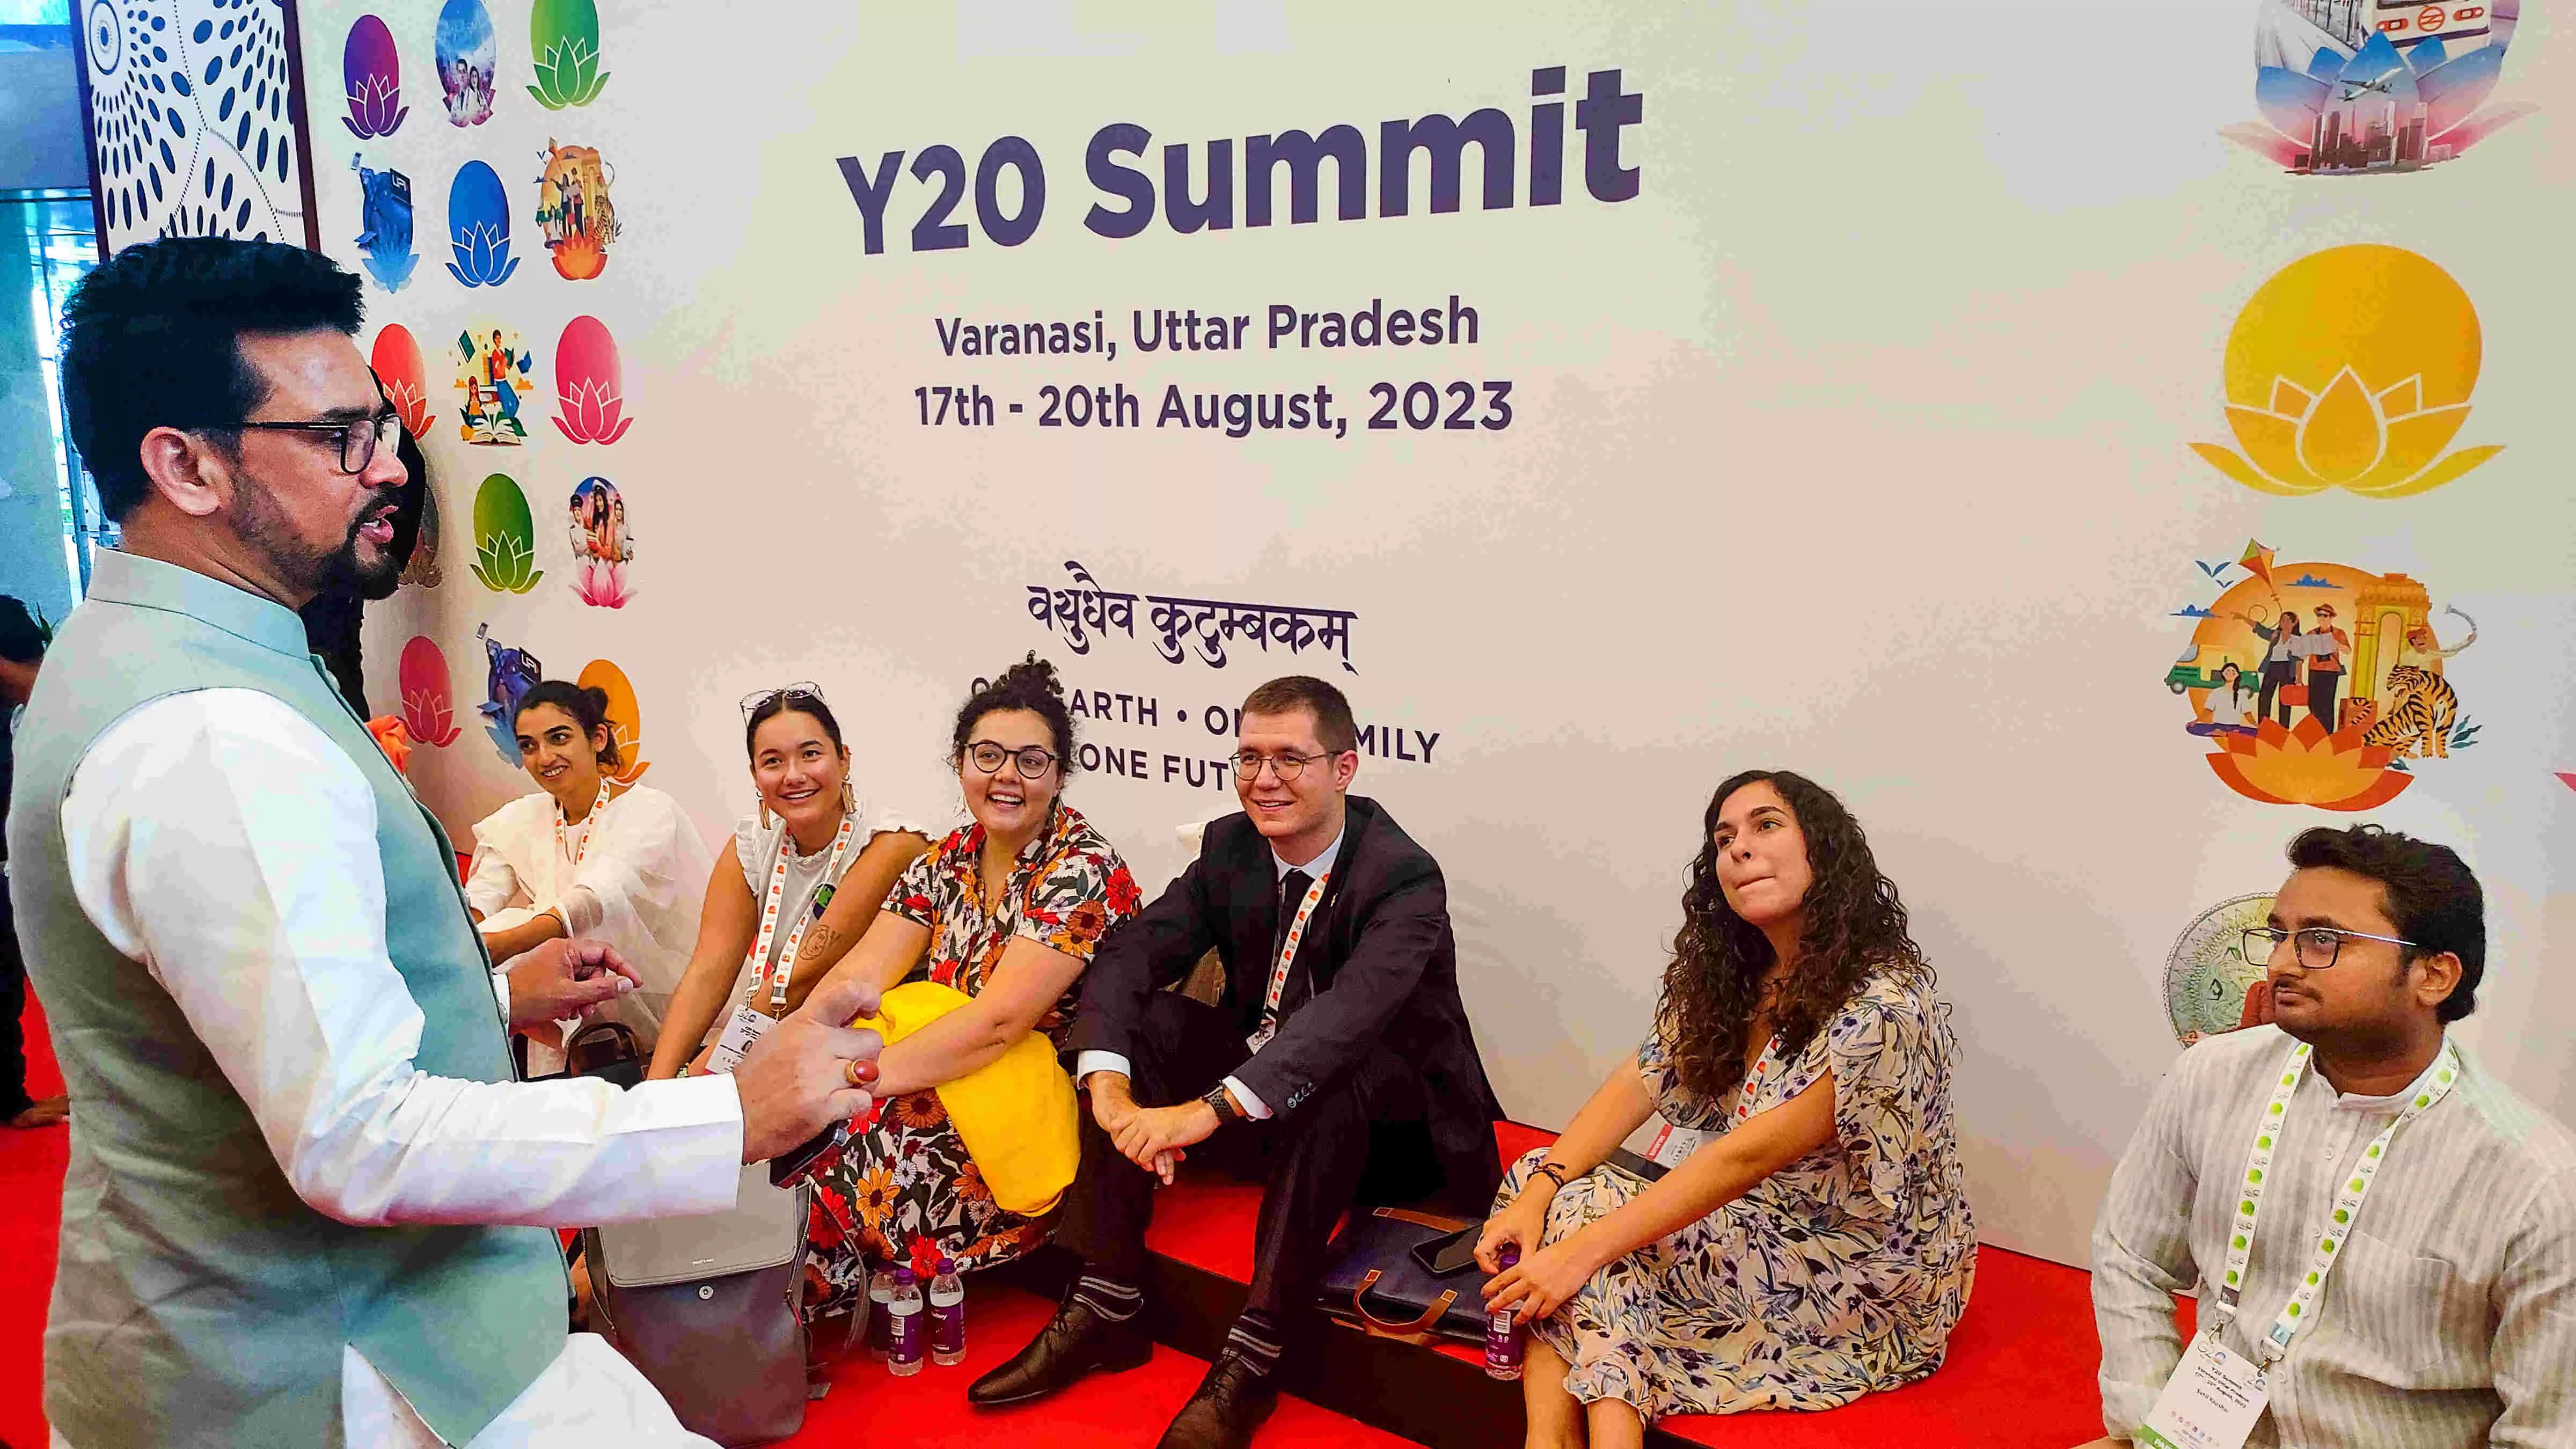 Varanasi Youth-20 Summit discusses issues such as climate change, peace-building, health